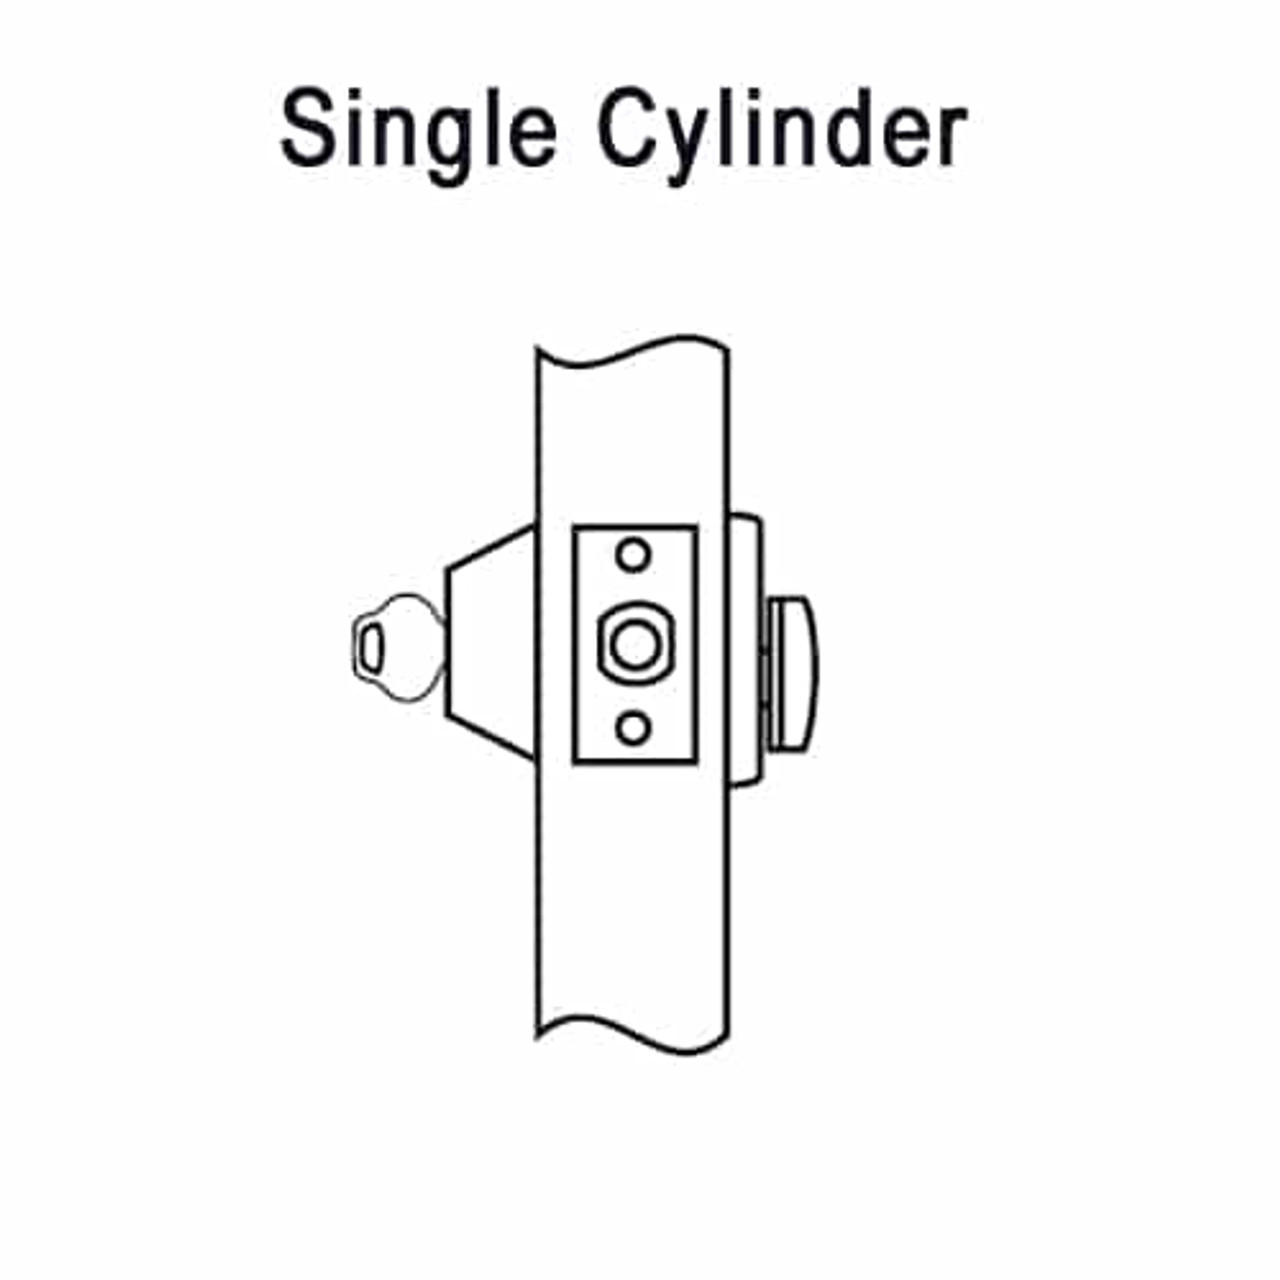 DL2213-605 Corbin DL2200 Series Cylindrical Deadlocks with Single Cylinder in Bright Brass